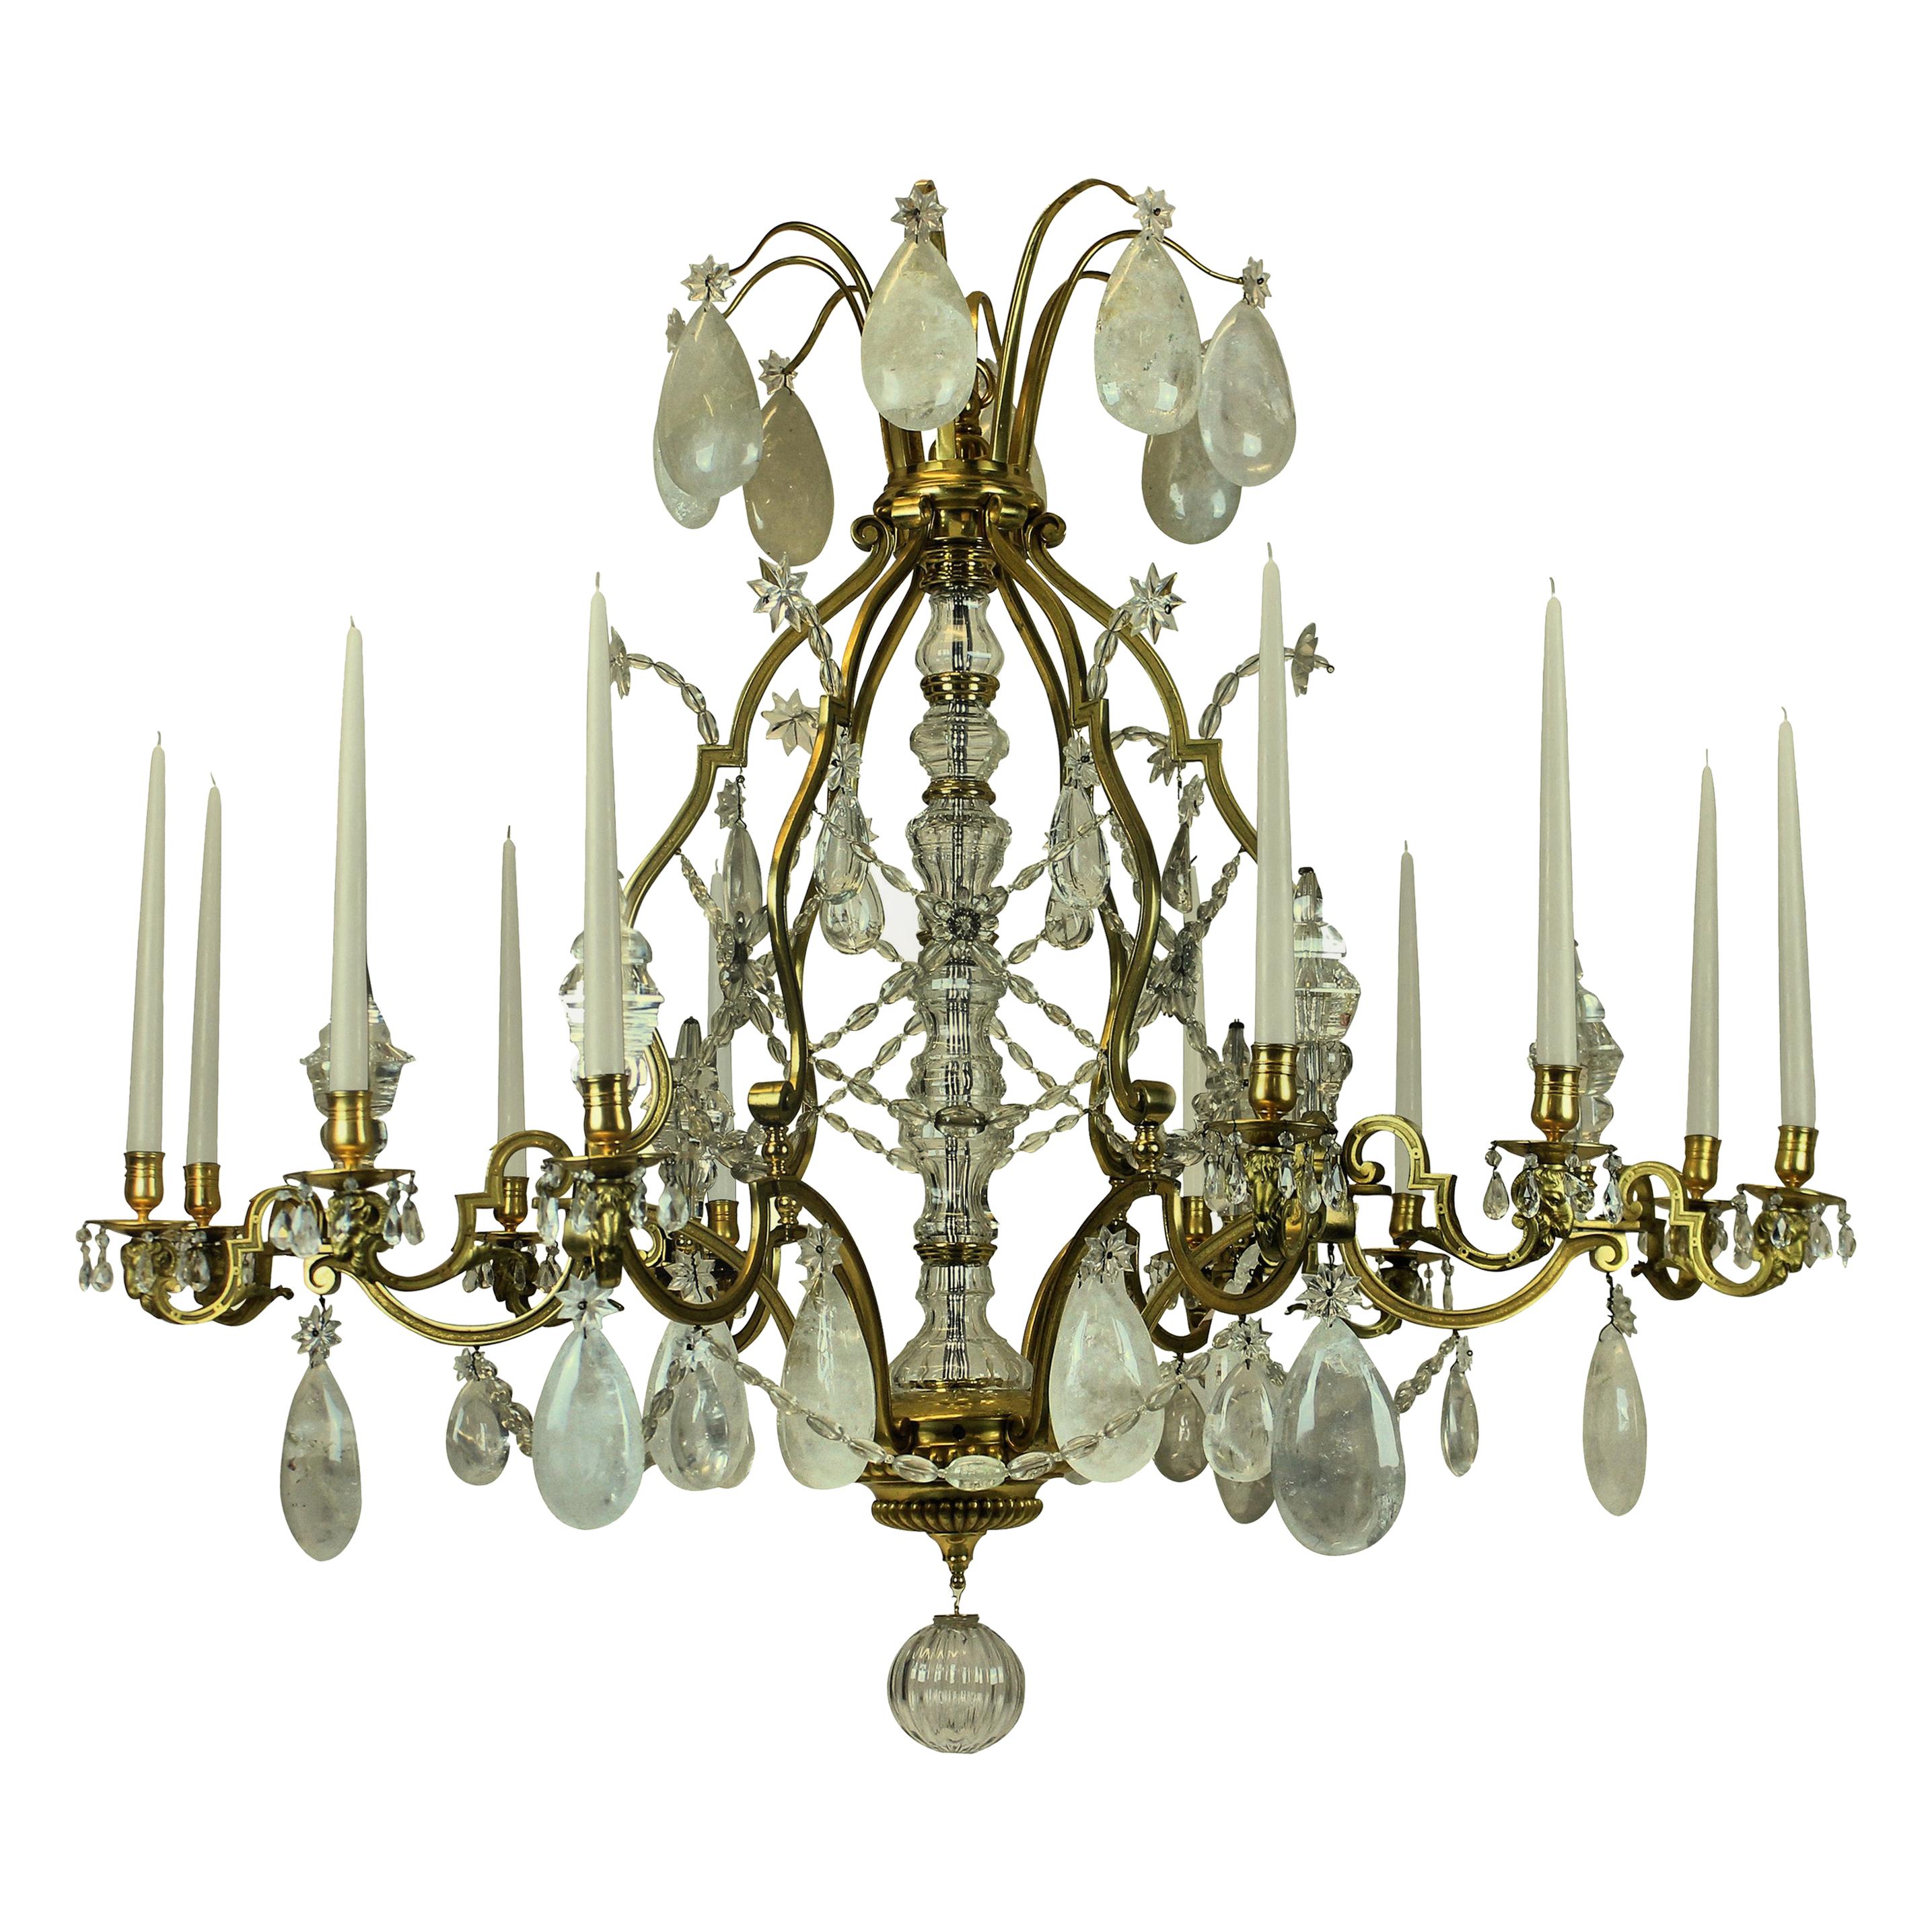 Large French Rock Crystal Chandelier of Fine Quality in the Louis XV Style